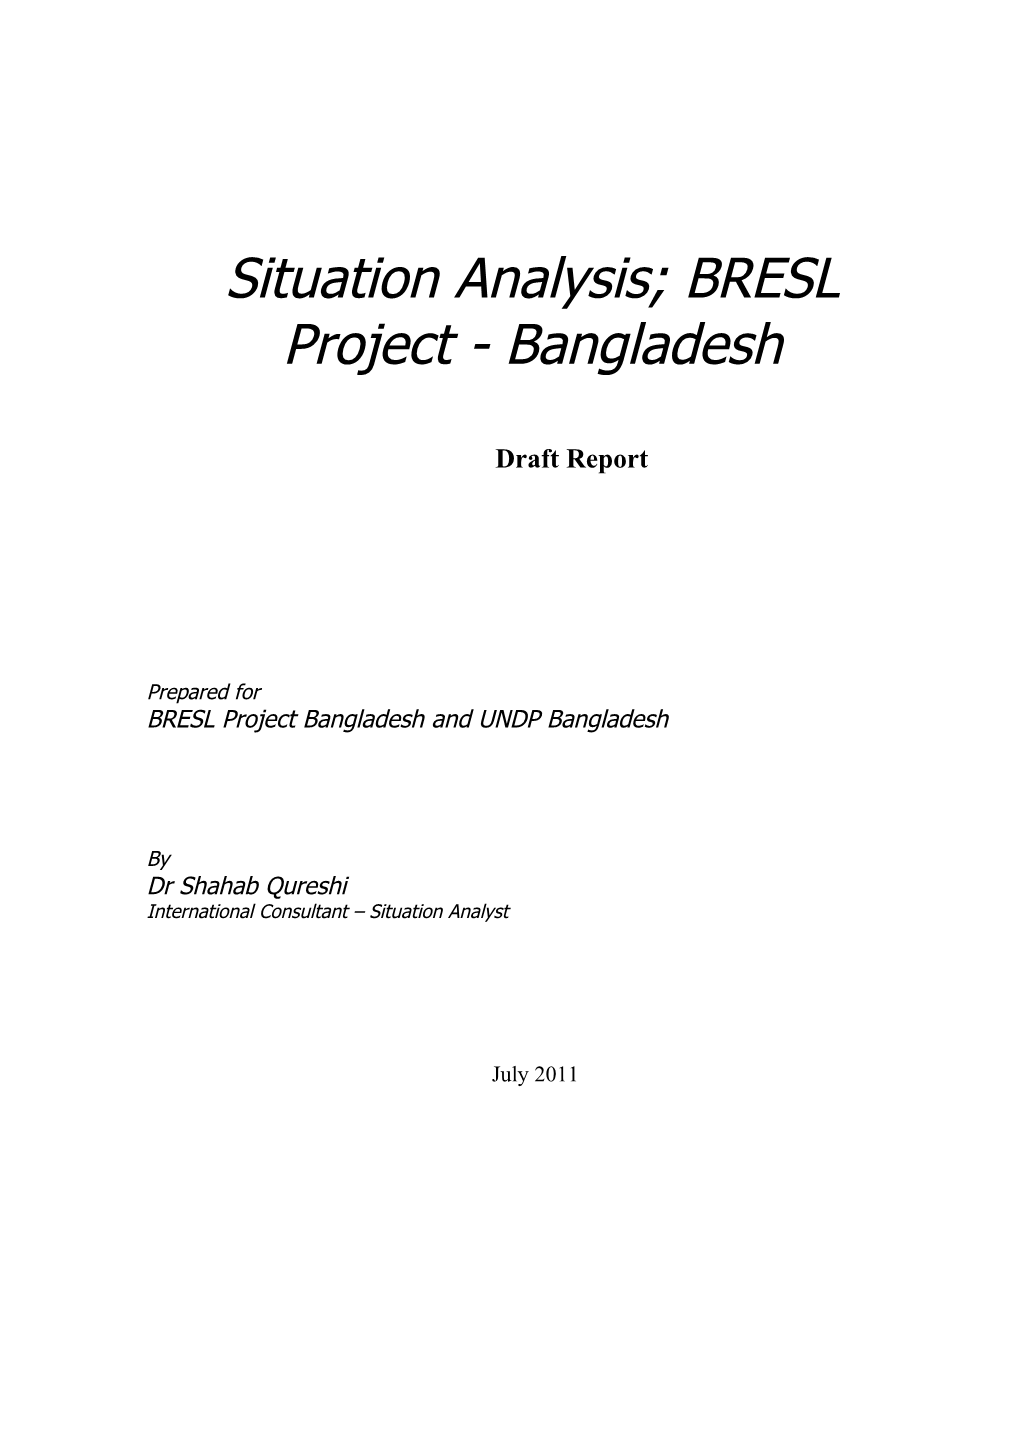 Bangladesh Industrial Policy 2010 Review